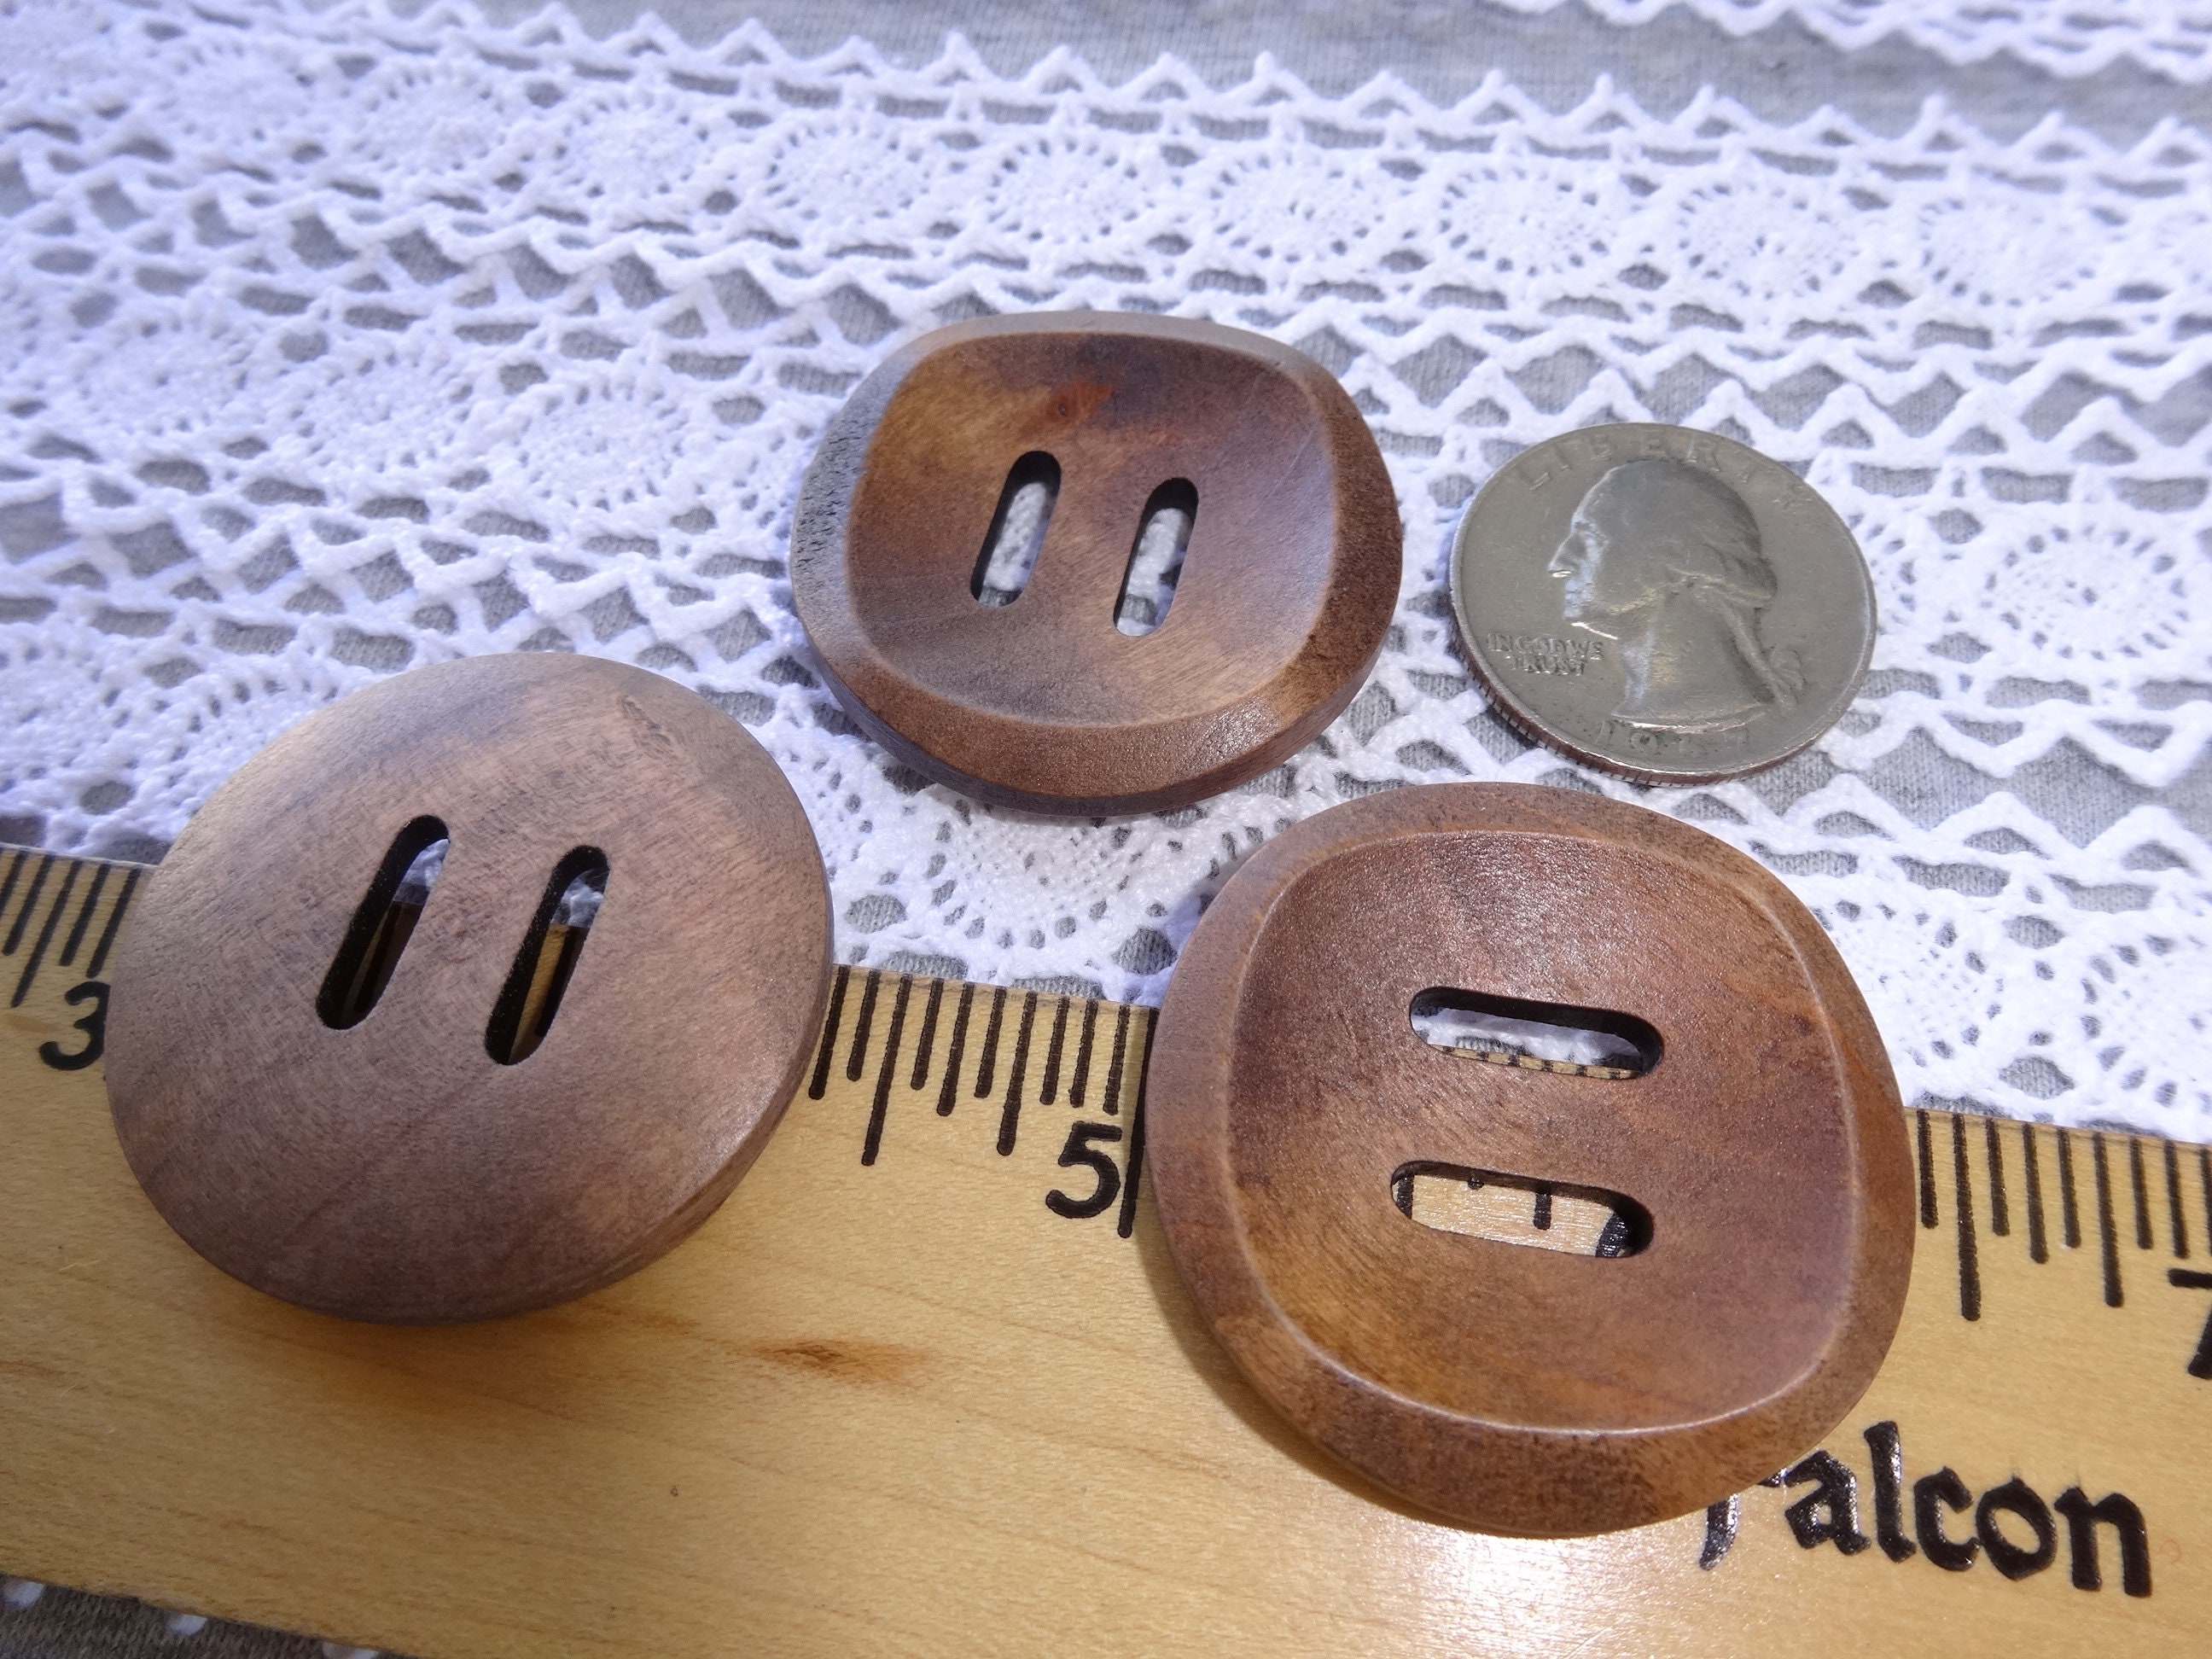 200Pcs Wood Buttons for Crafts 20mm Wooden Craft Buttons with 2 Holes for  DIY Sewing Craft .78 Inch - Fabric